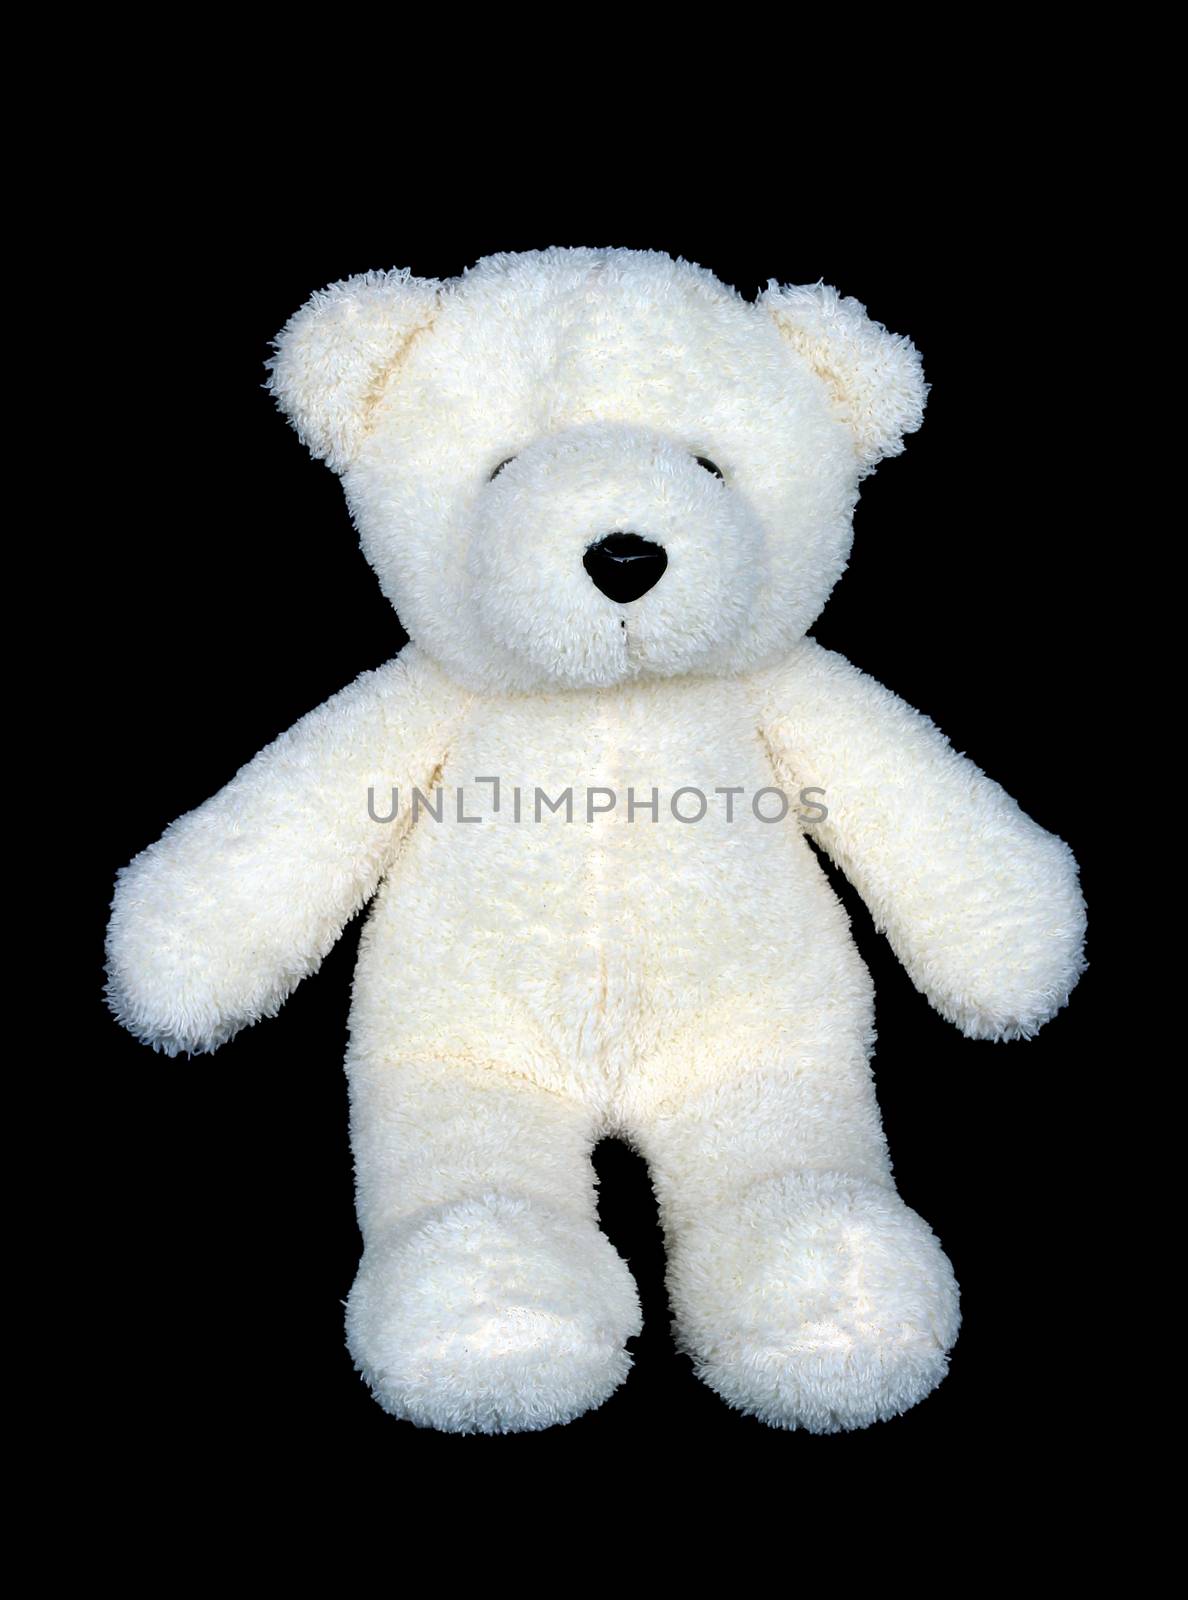 Image of toy teddy bear on black background